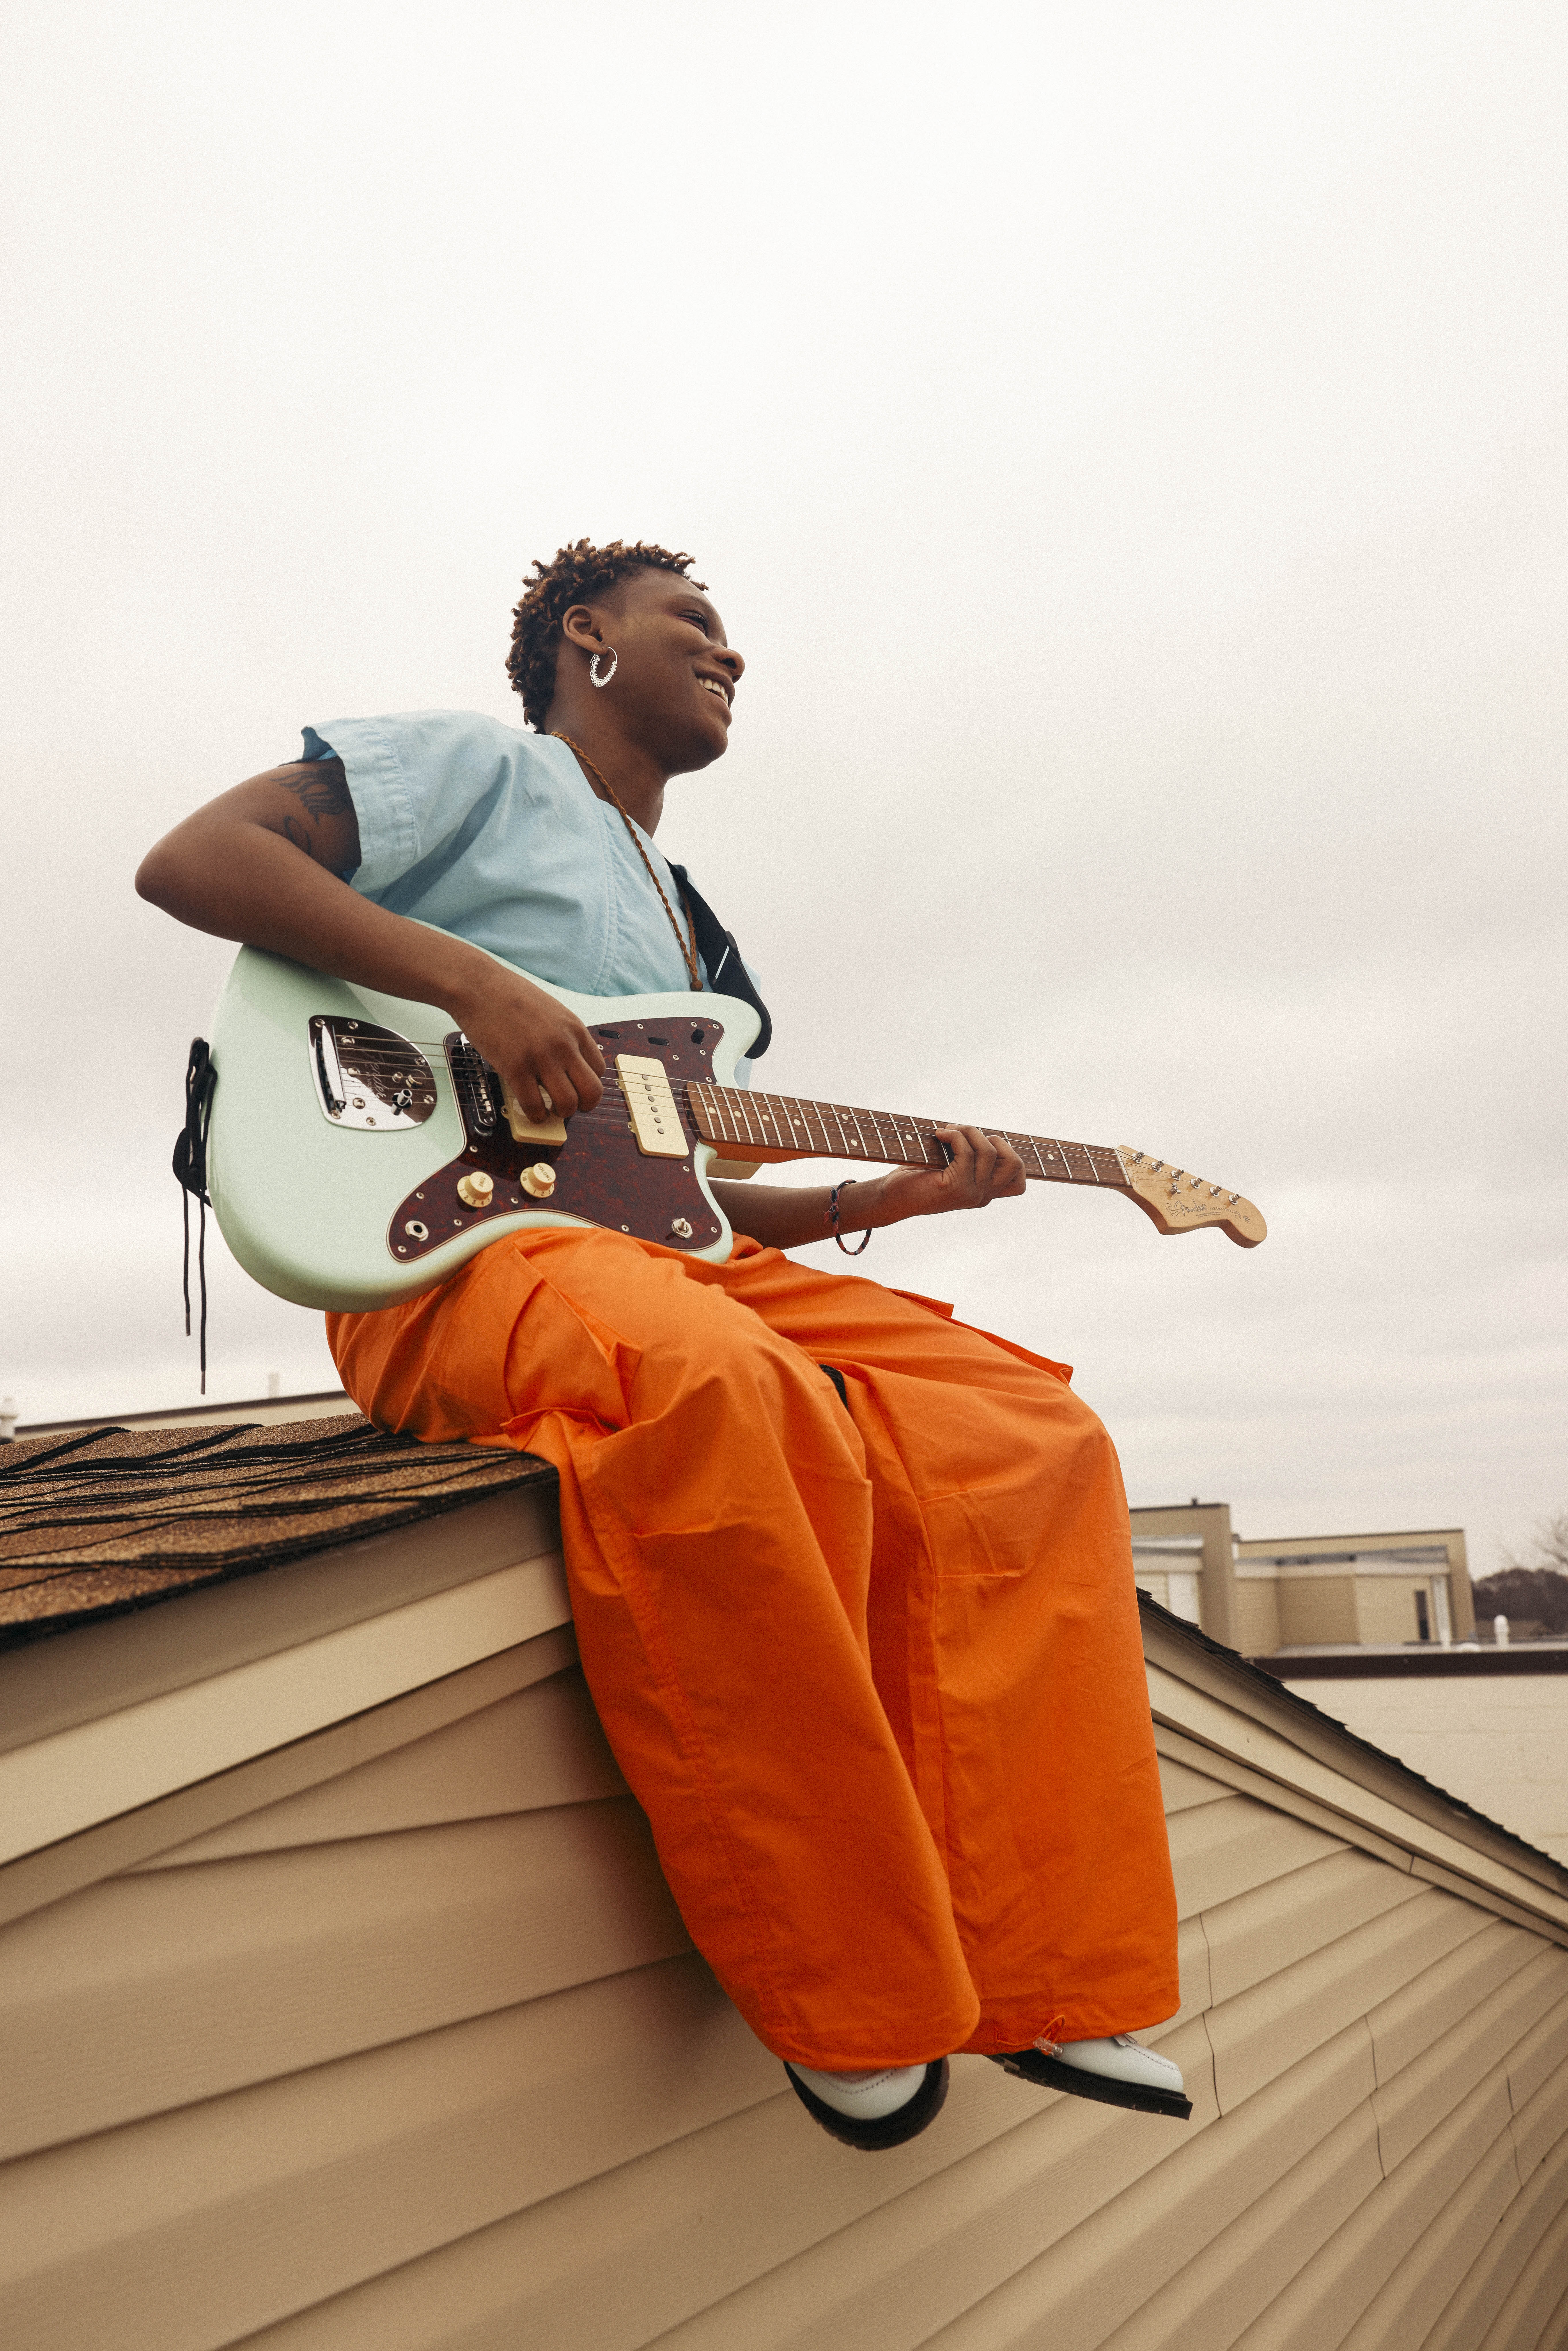 dreamer poses on a rooftop holding their guitar